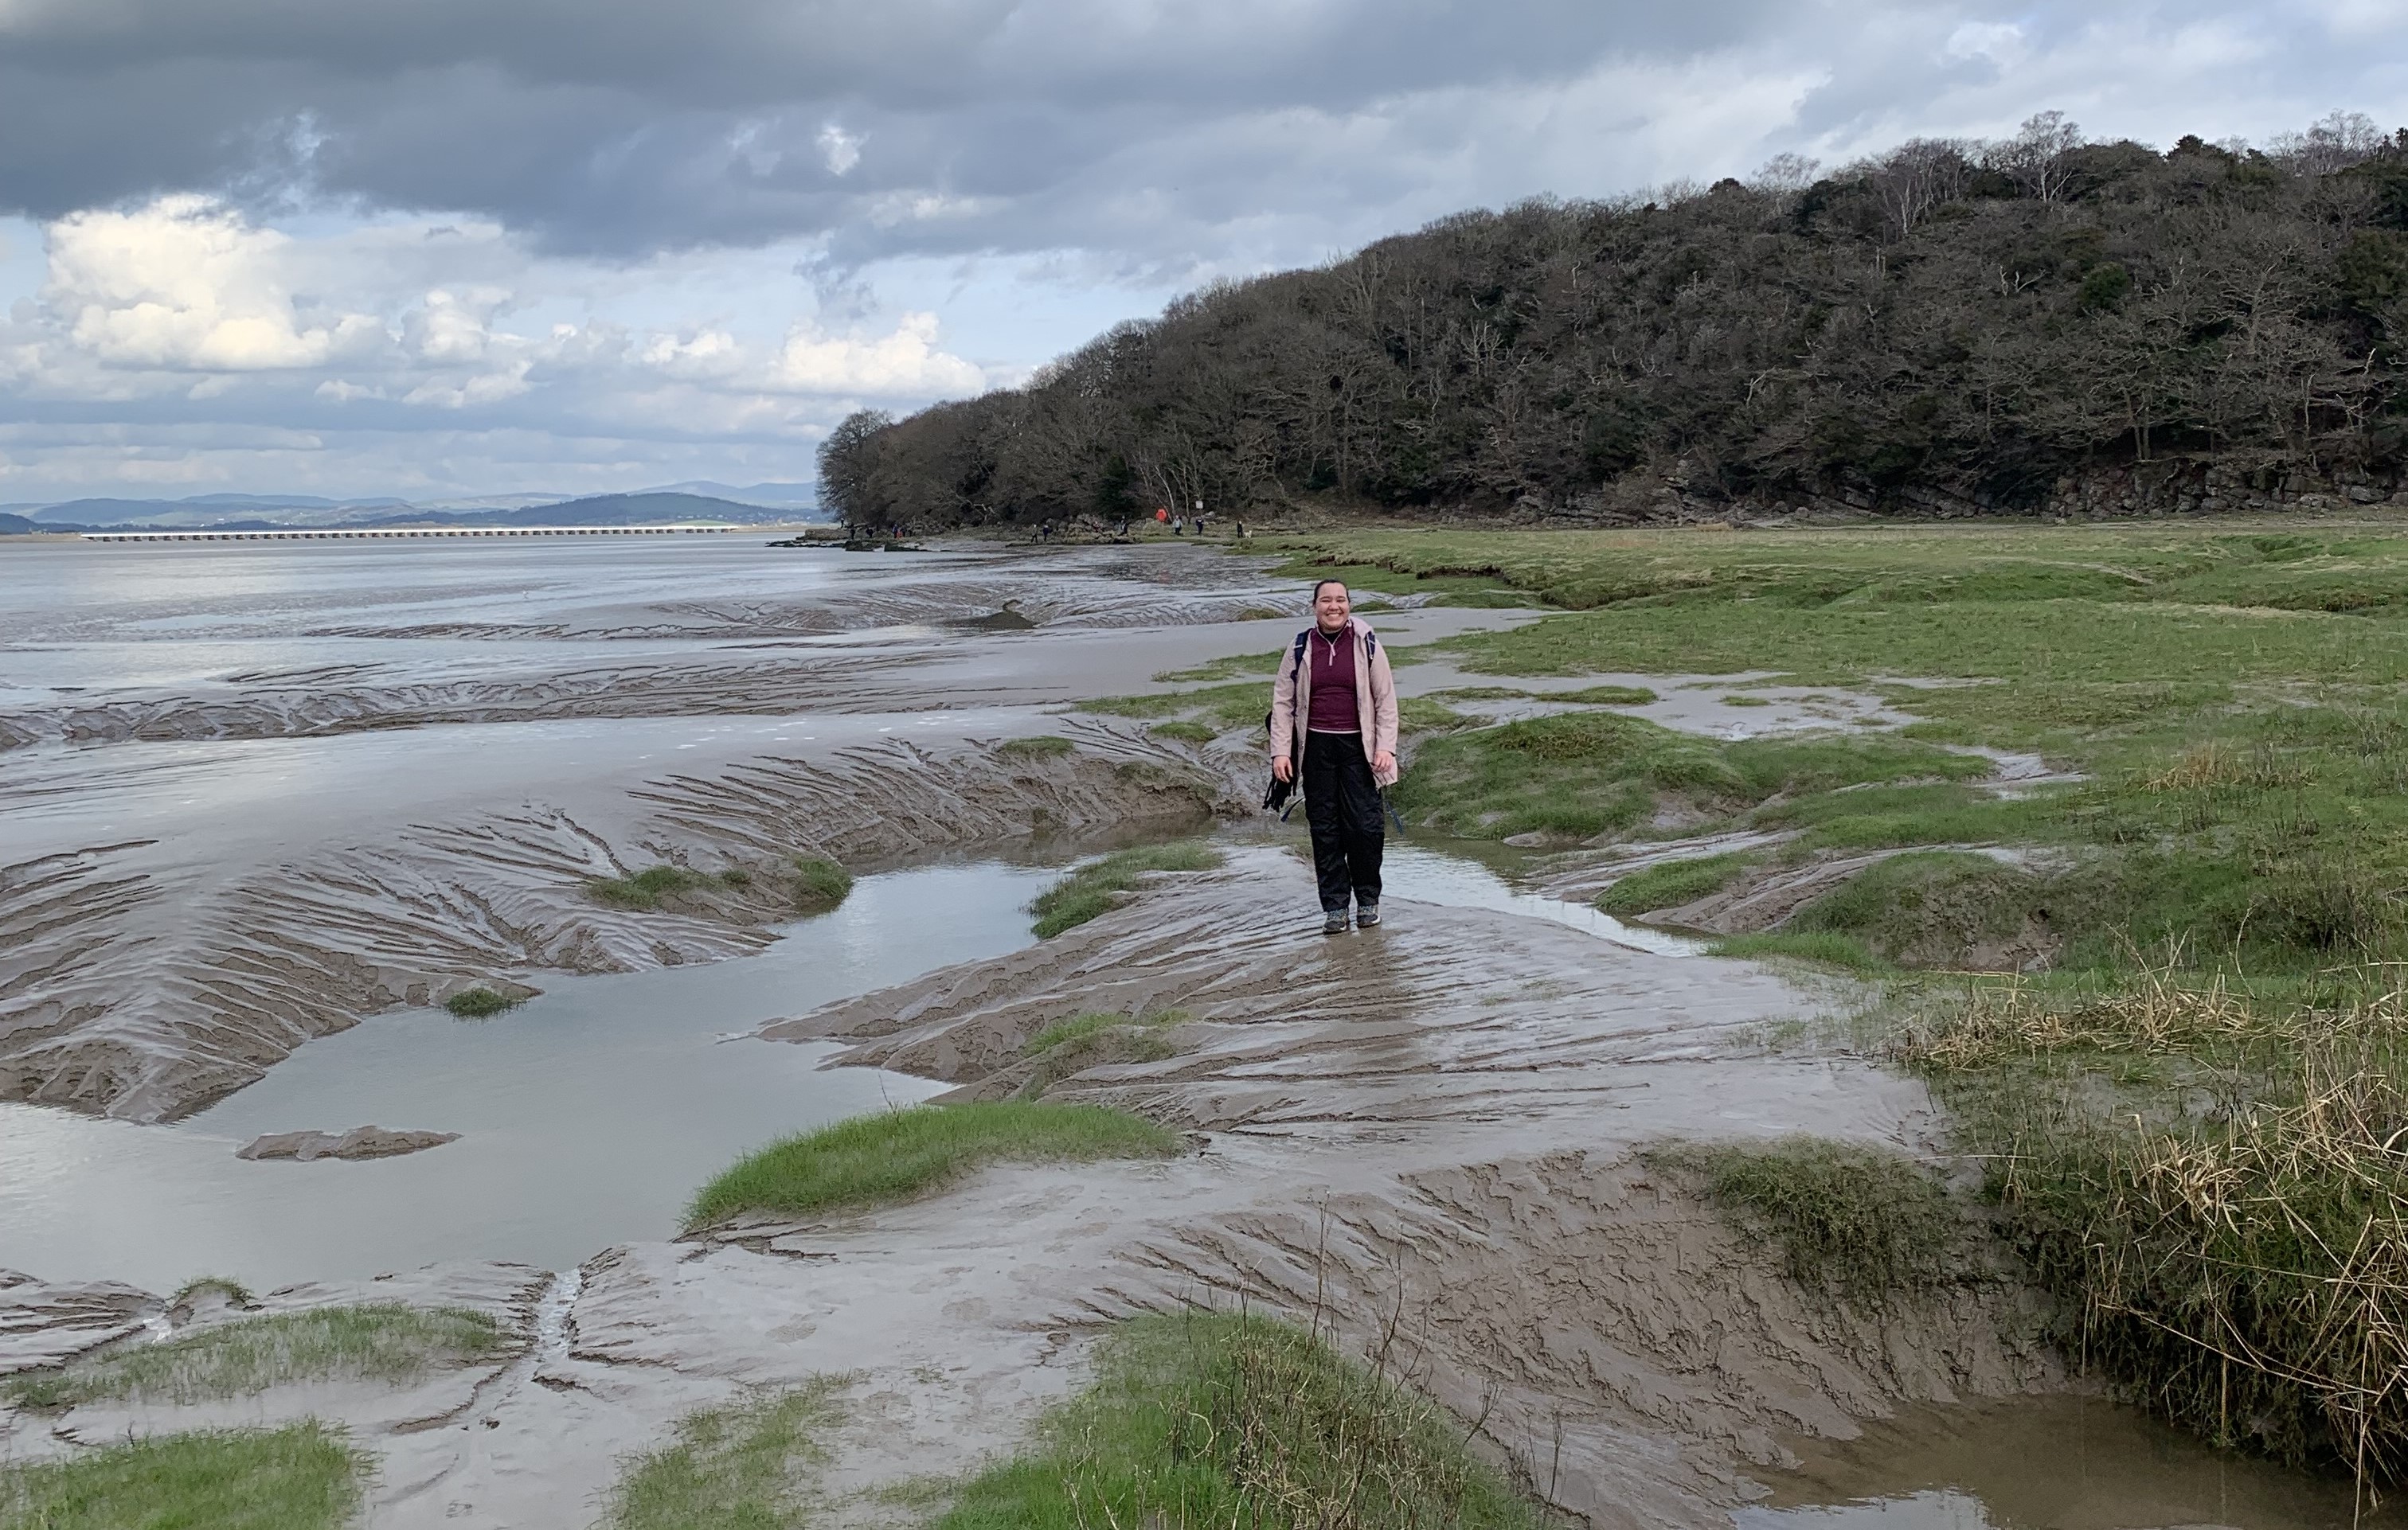 Student Lyea stands smiling on the beachside in Arnside.